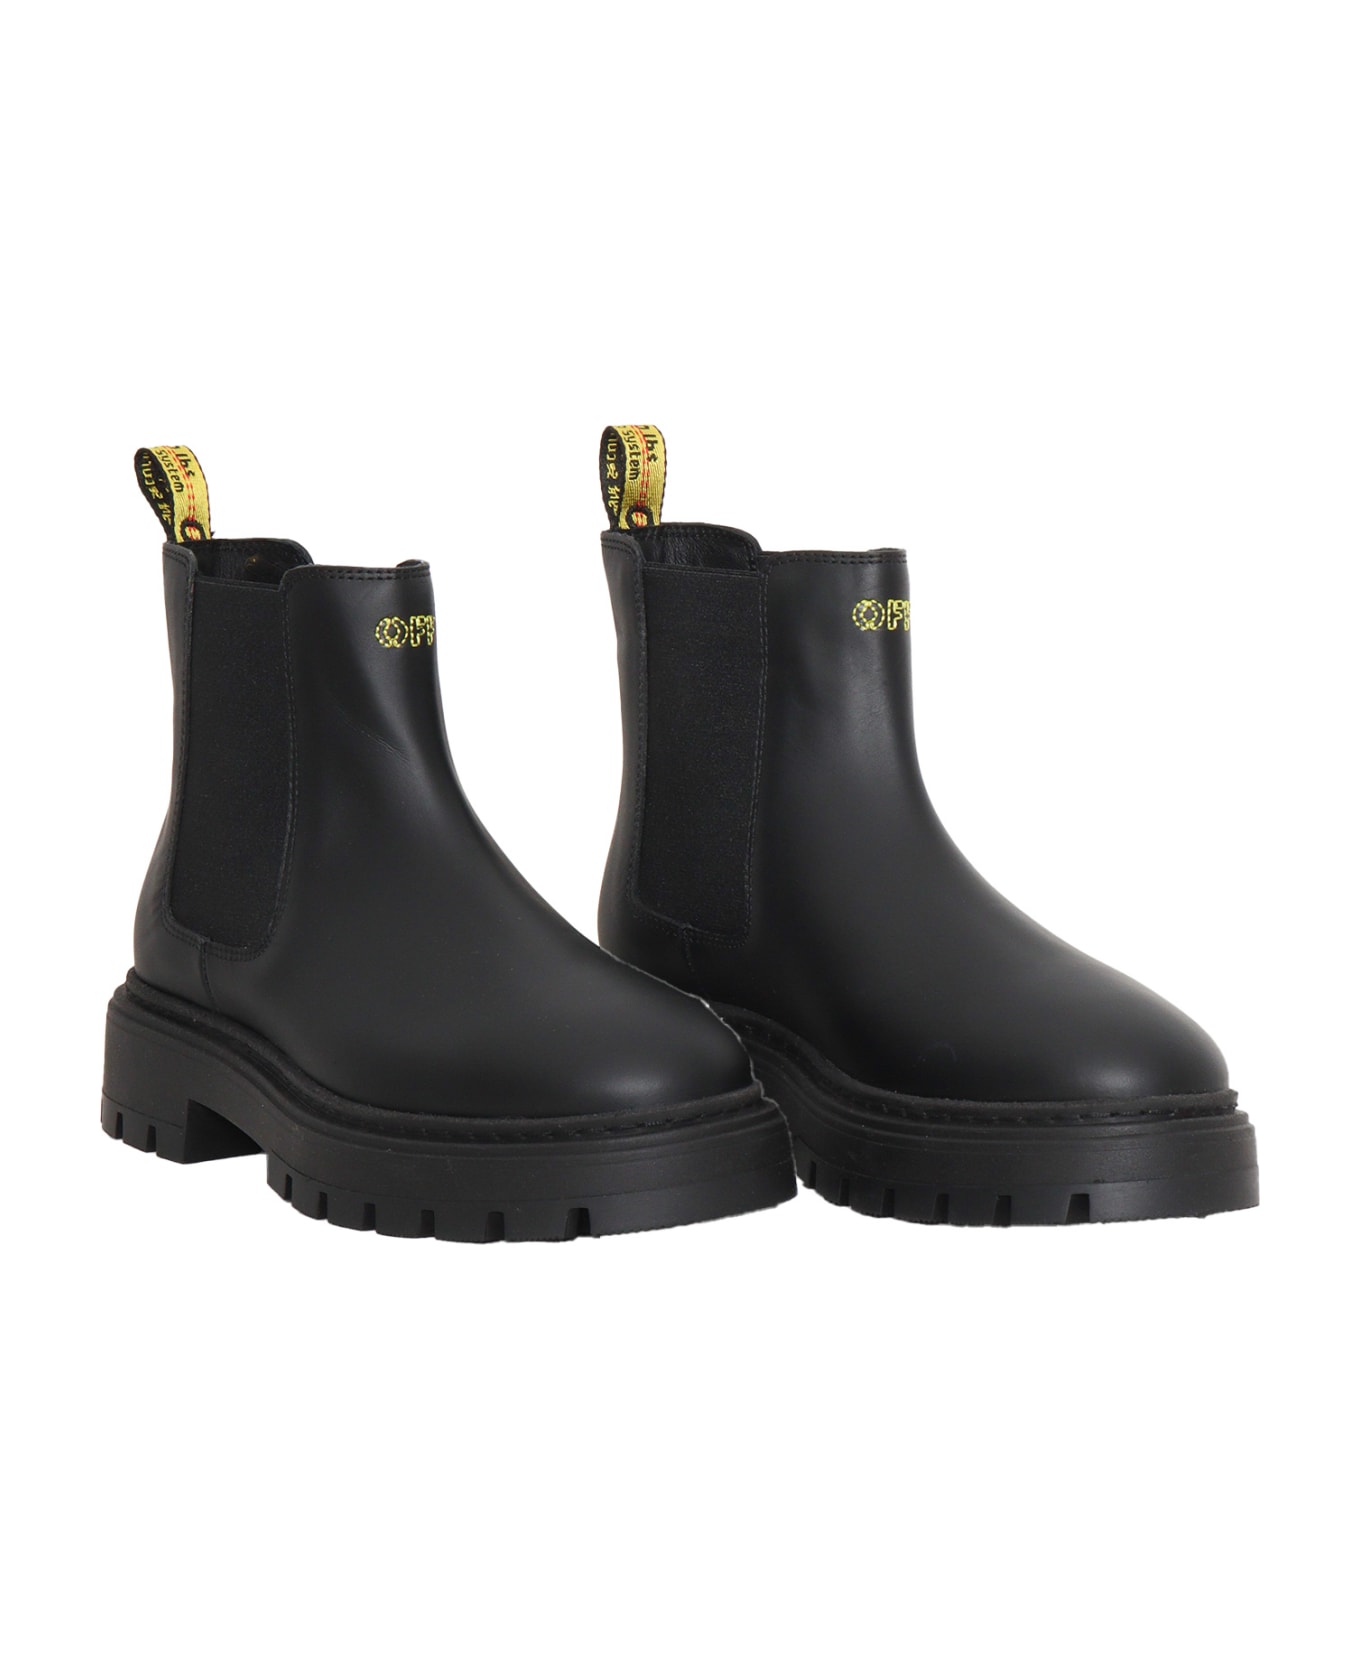 Off-White Chelsea Boots - BLACK